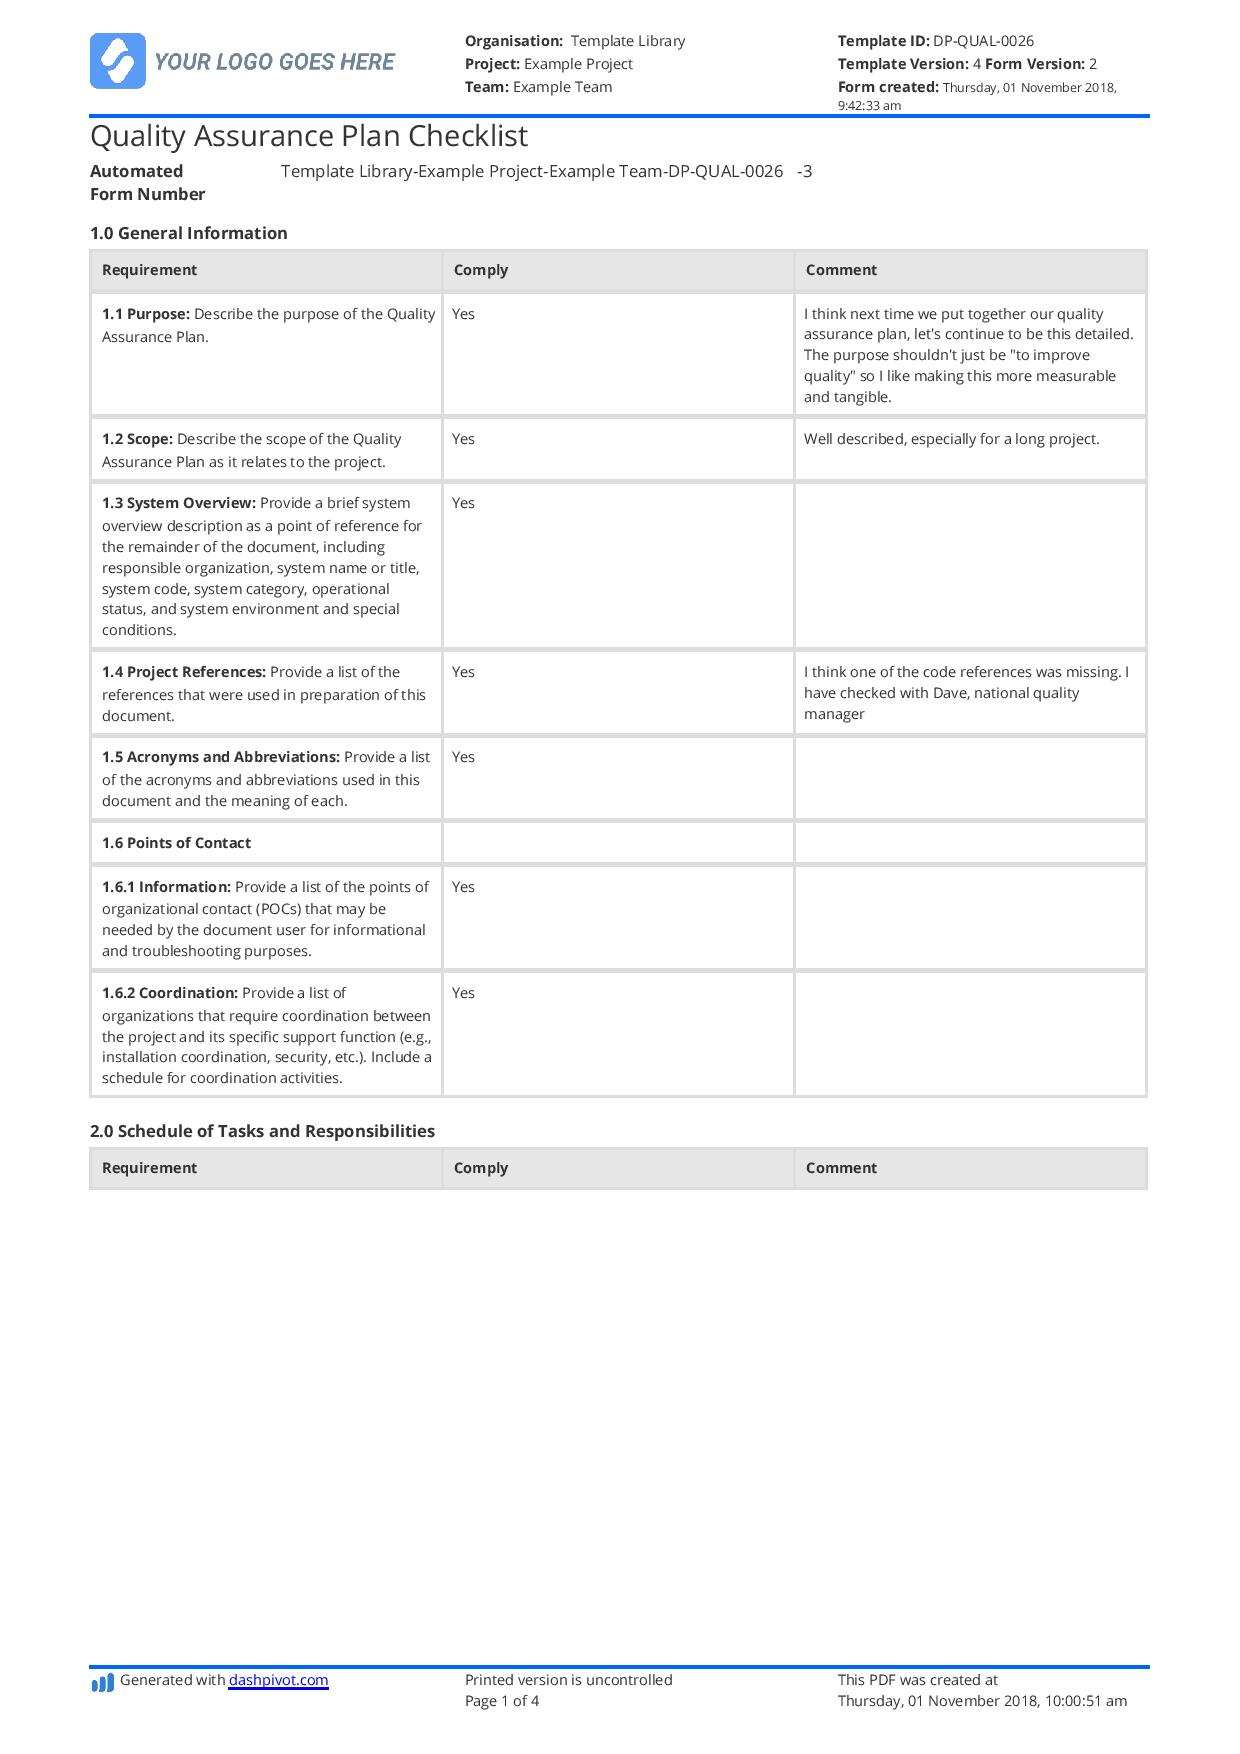 Quality Assurance Plan Checklist: Free and editable template With Regard To Internal Audit Quality Assurance Checklist Template Intended For Internal Audit Quality Assurance Checklist Template